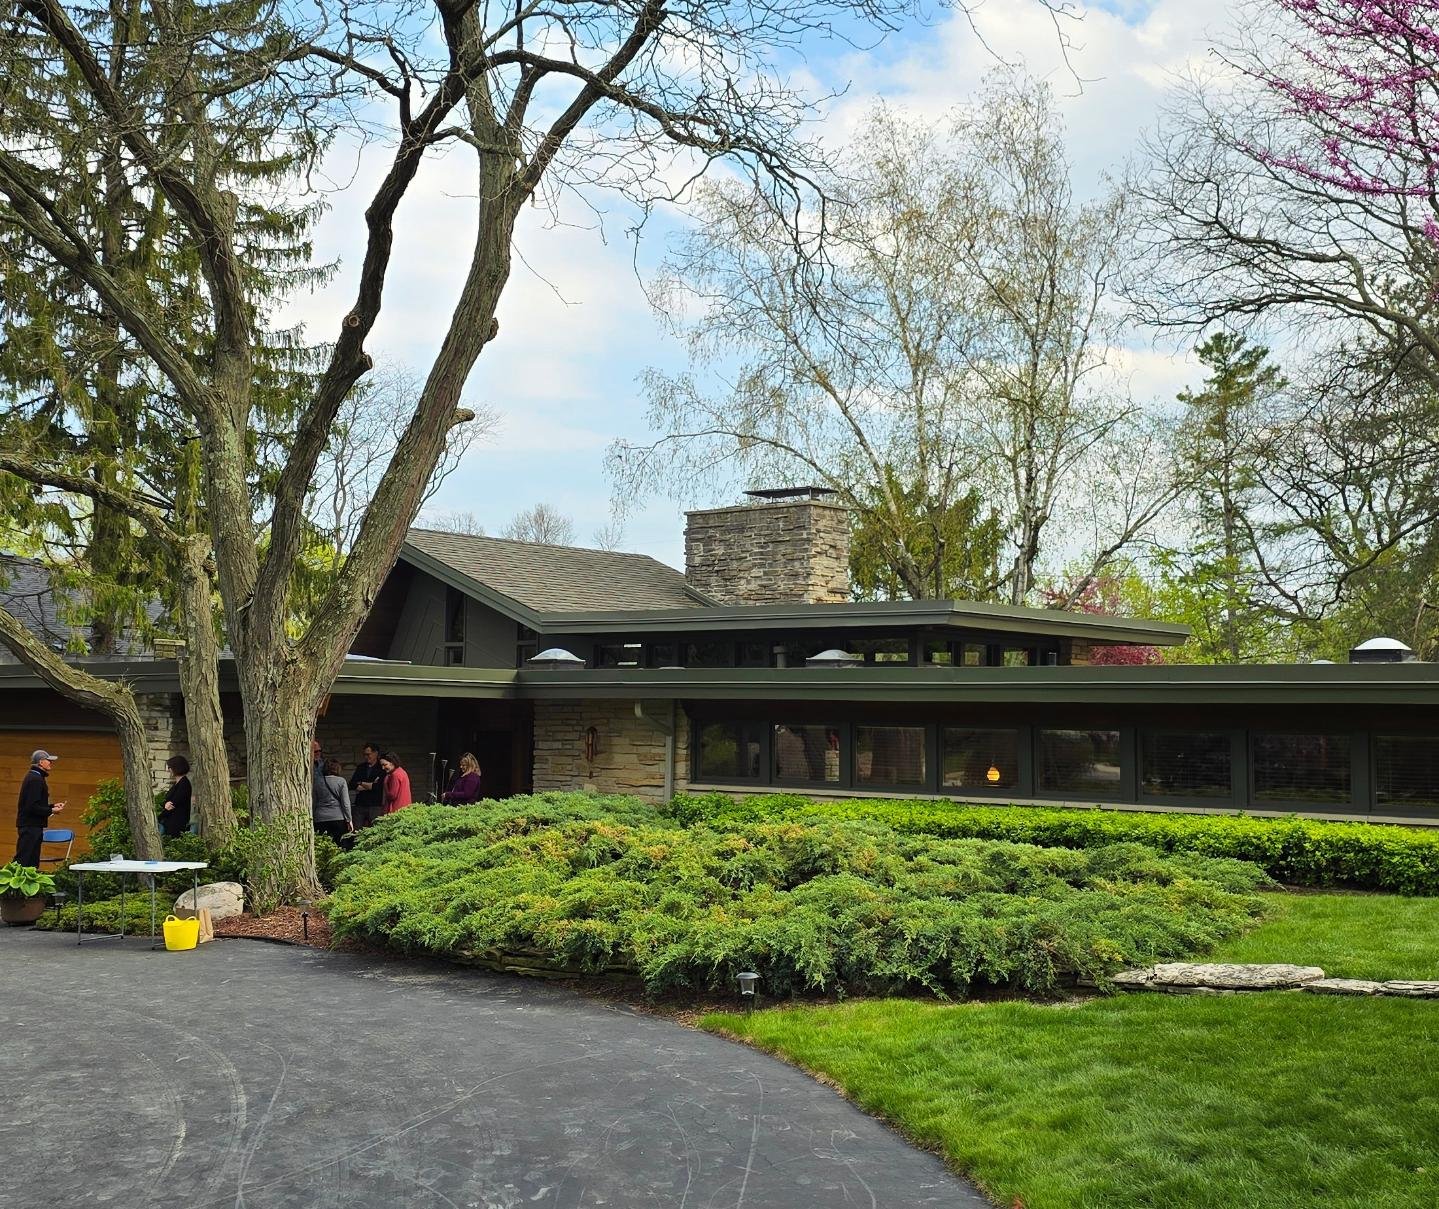 Photos from the excellent Milwaukee Spaces and Traces mid-century home tour yesterday organized by @historicmilwaukee.
Architects included John Randal McDonald, Jerome Landfield (Wright apprentice), Jesse Claude Caraway (Wright apprentice), Willis an